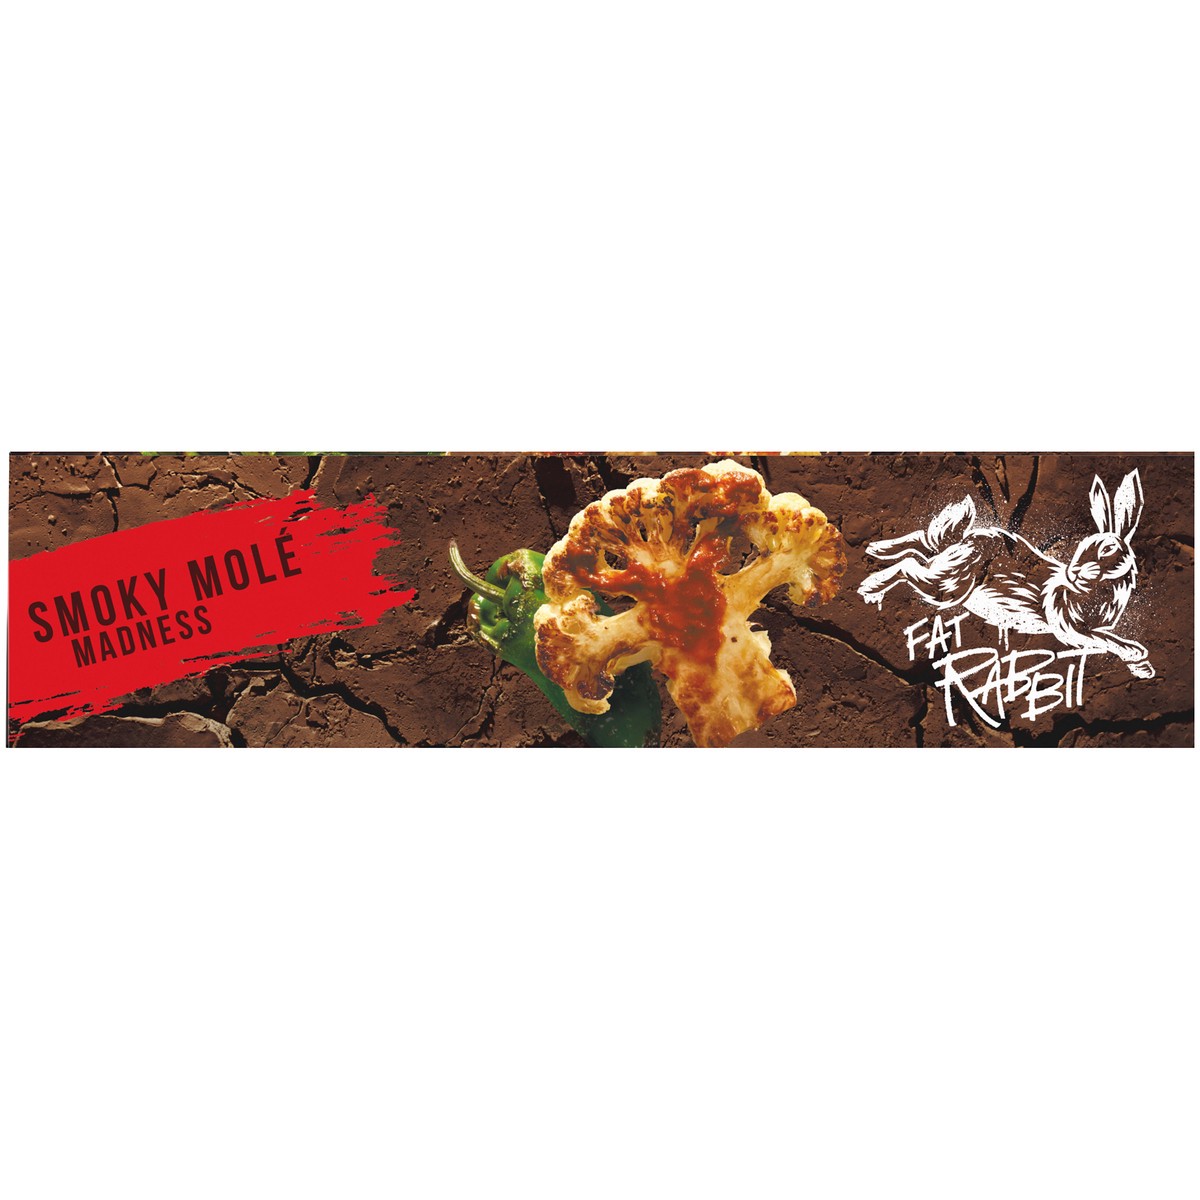 slide 3 of 14, Fat Rabbit Smoky Mole Madness with Roasted Vegetables, Pinto Beans & Cheese in a Red Mole Sauce over Brown Rice Frozen Meal, 11 oz Box, 11 oz